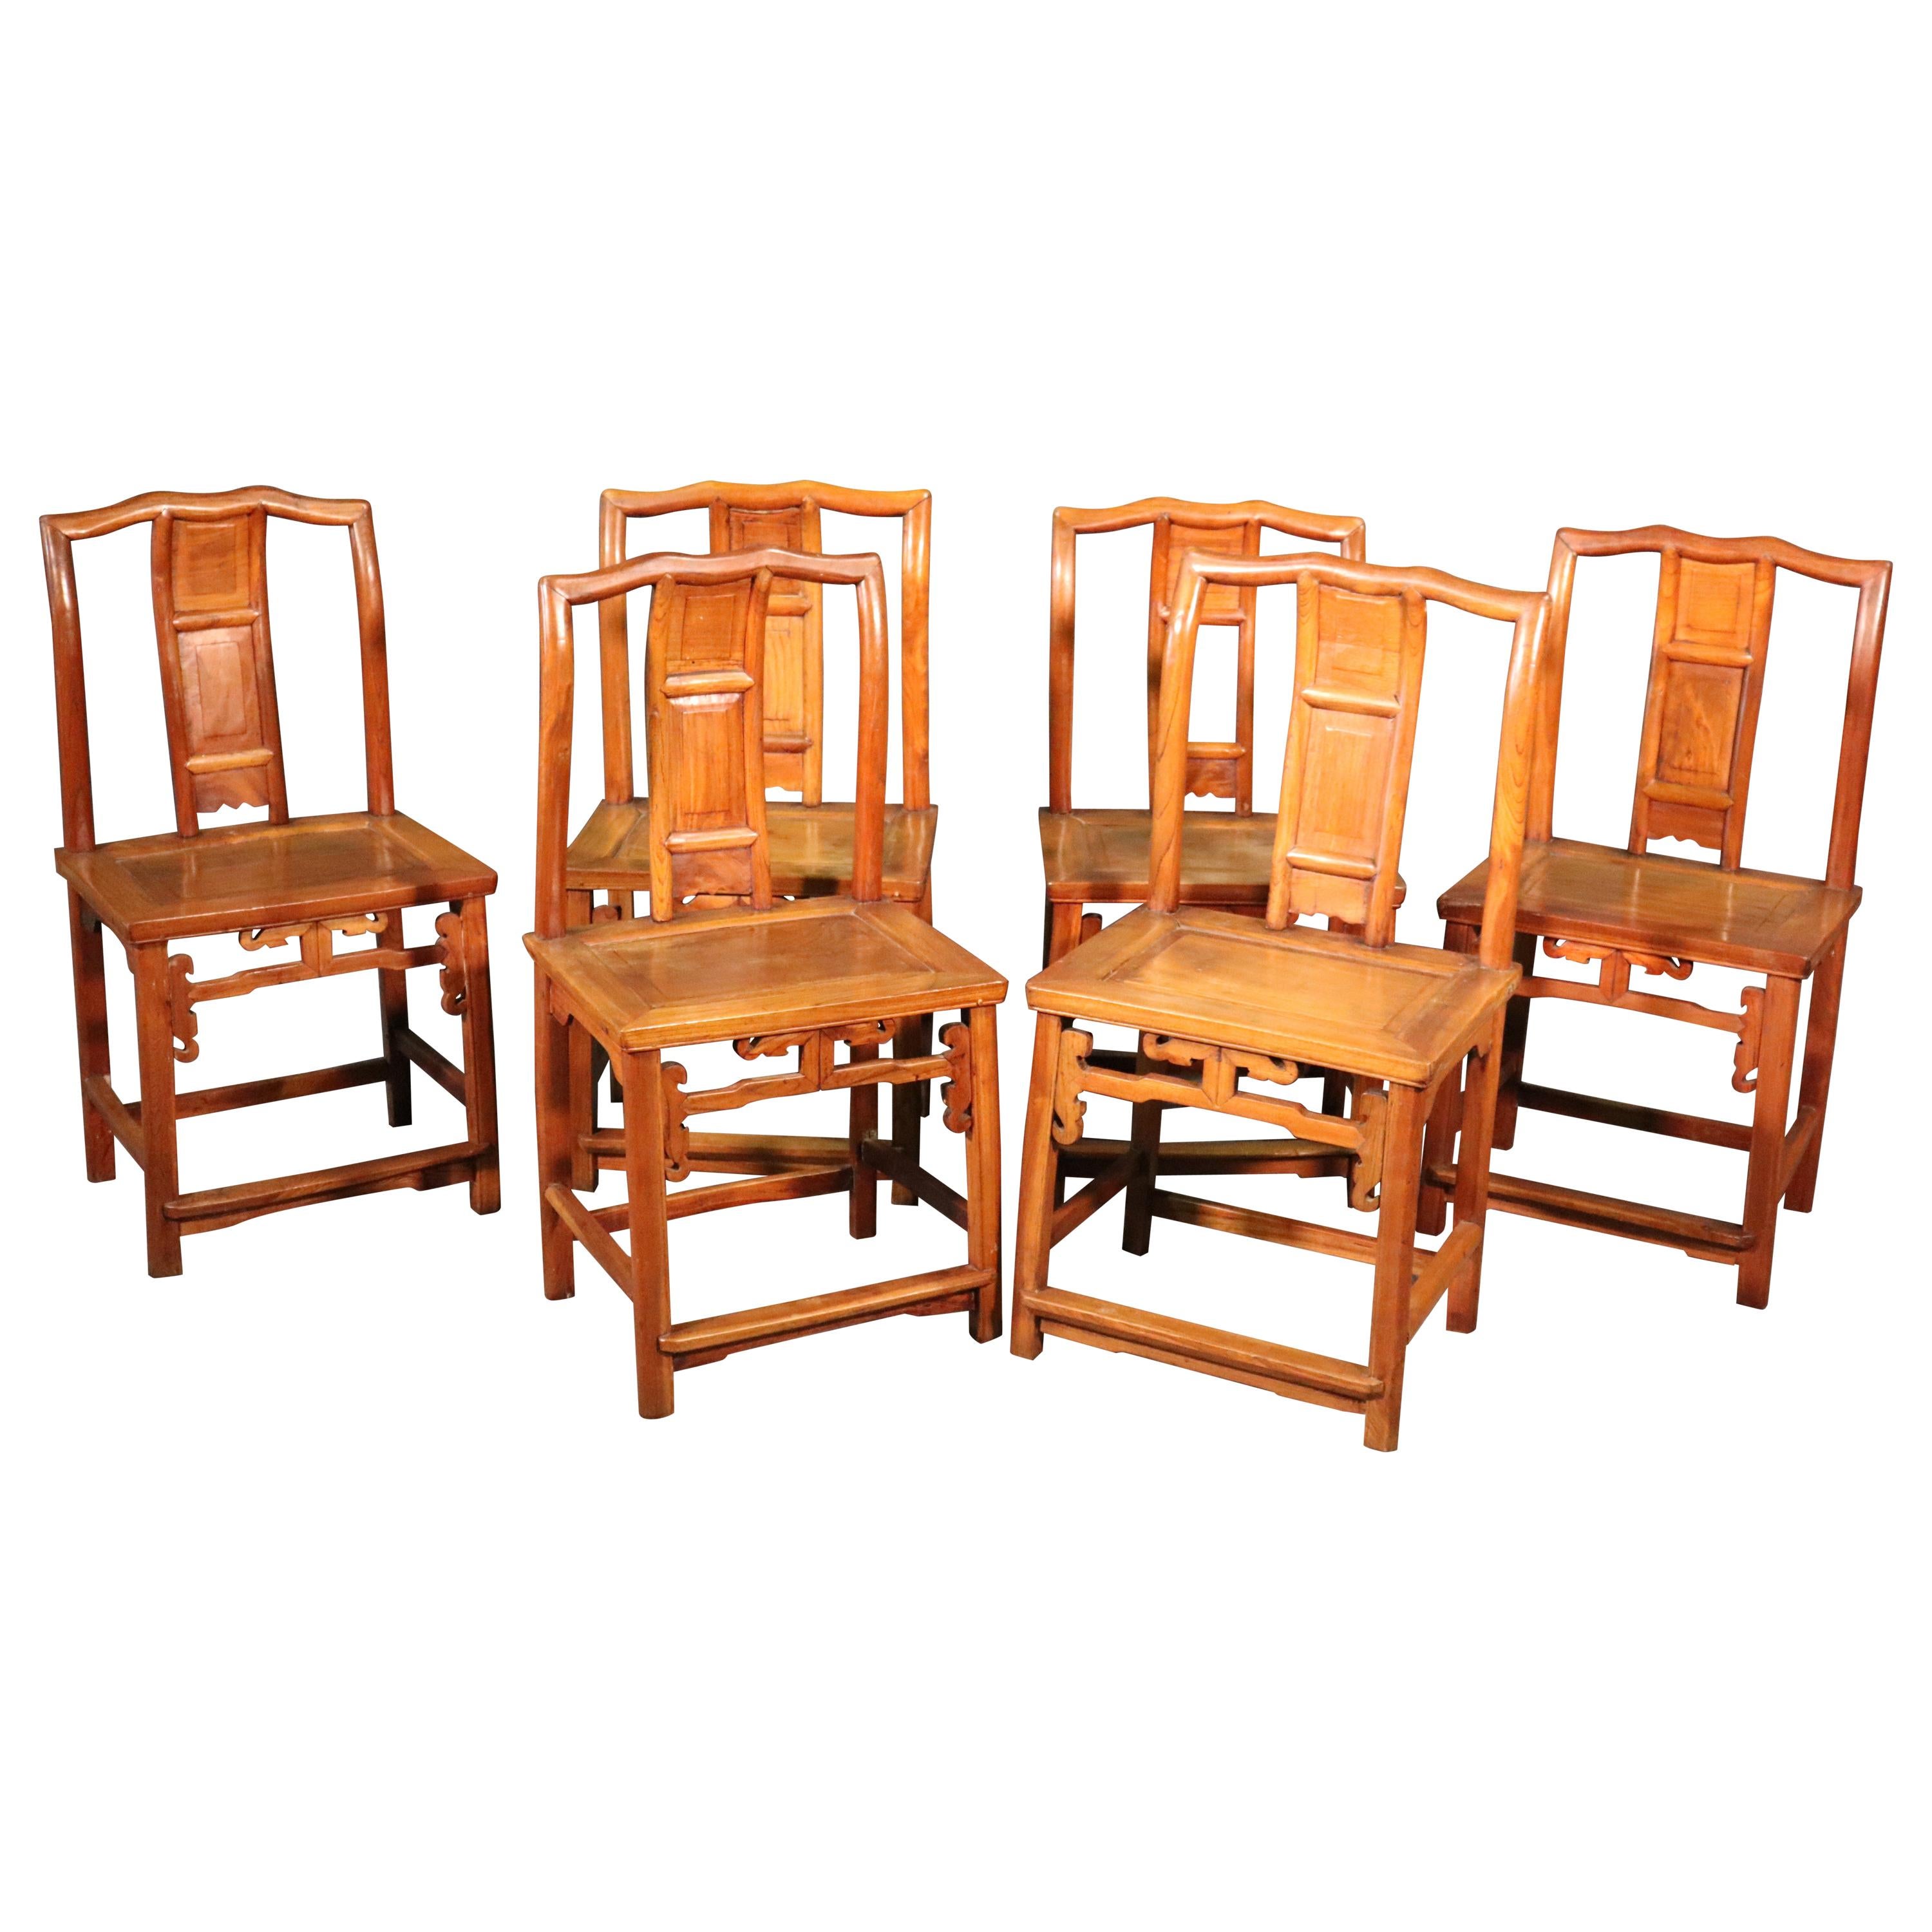 Set of 6 Six Asian Tan Su Style Chinese Camphor Wood Dining Chairs, circa 1890s